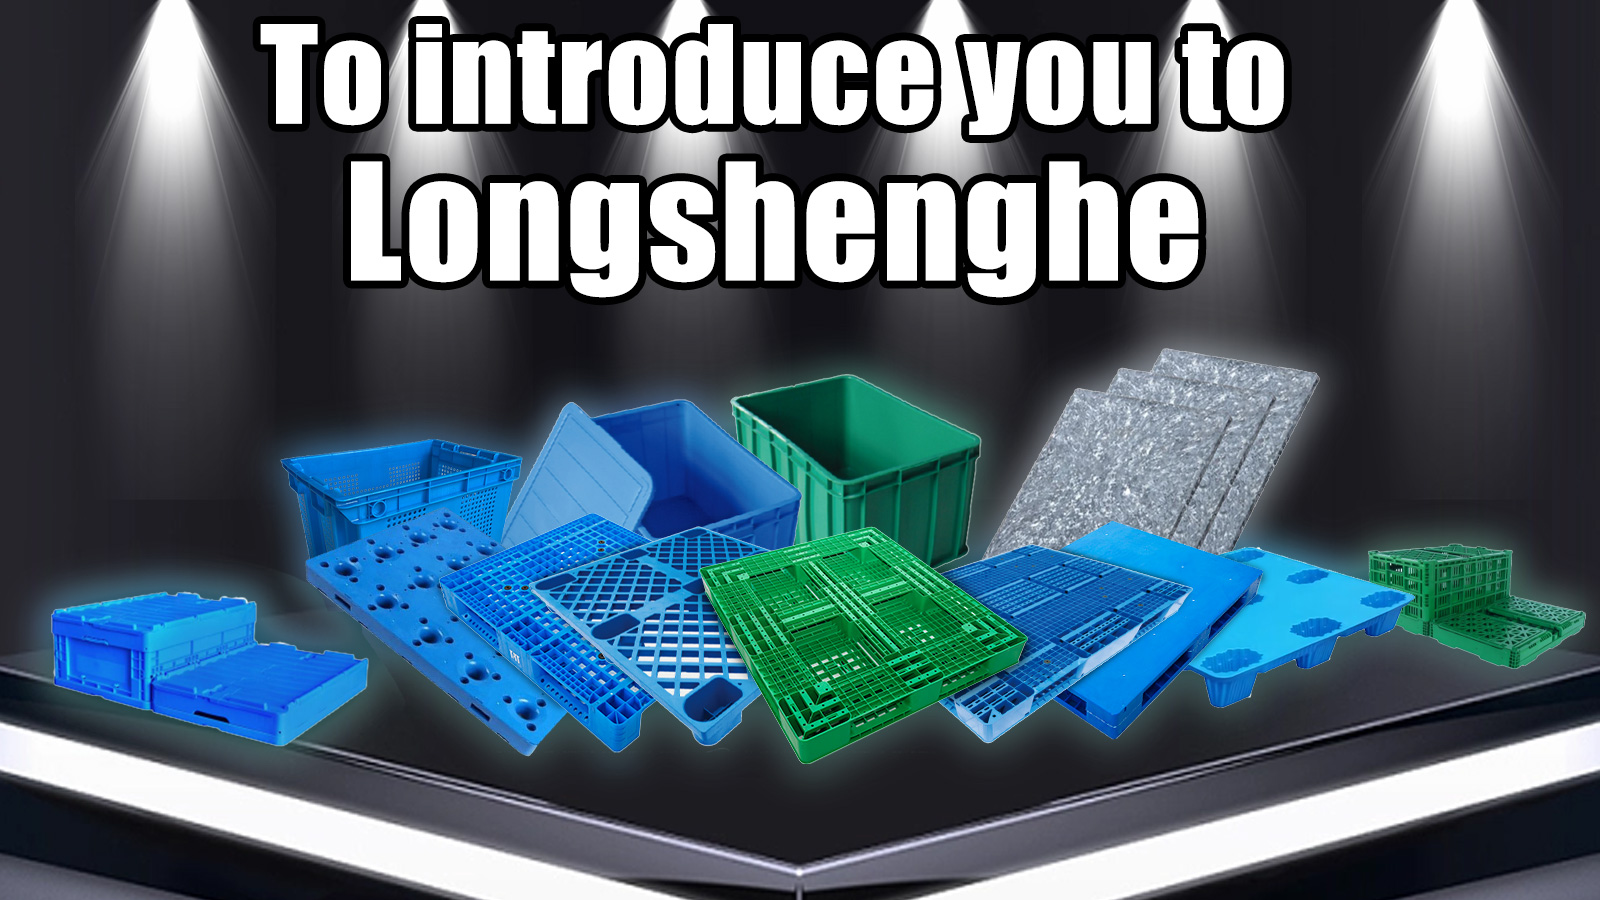 To introduce you to Longshenghe